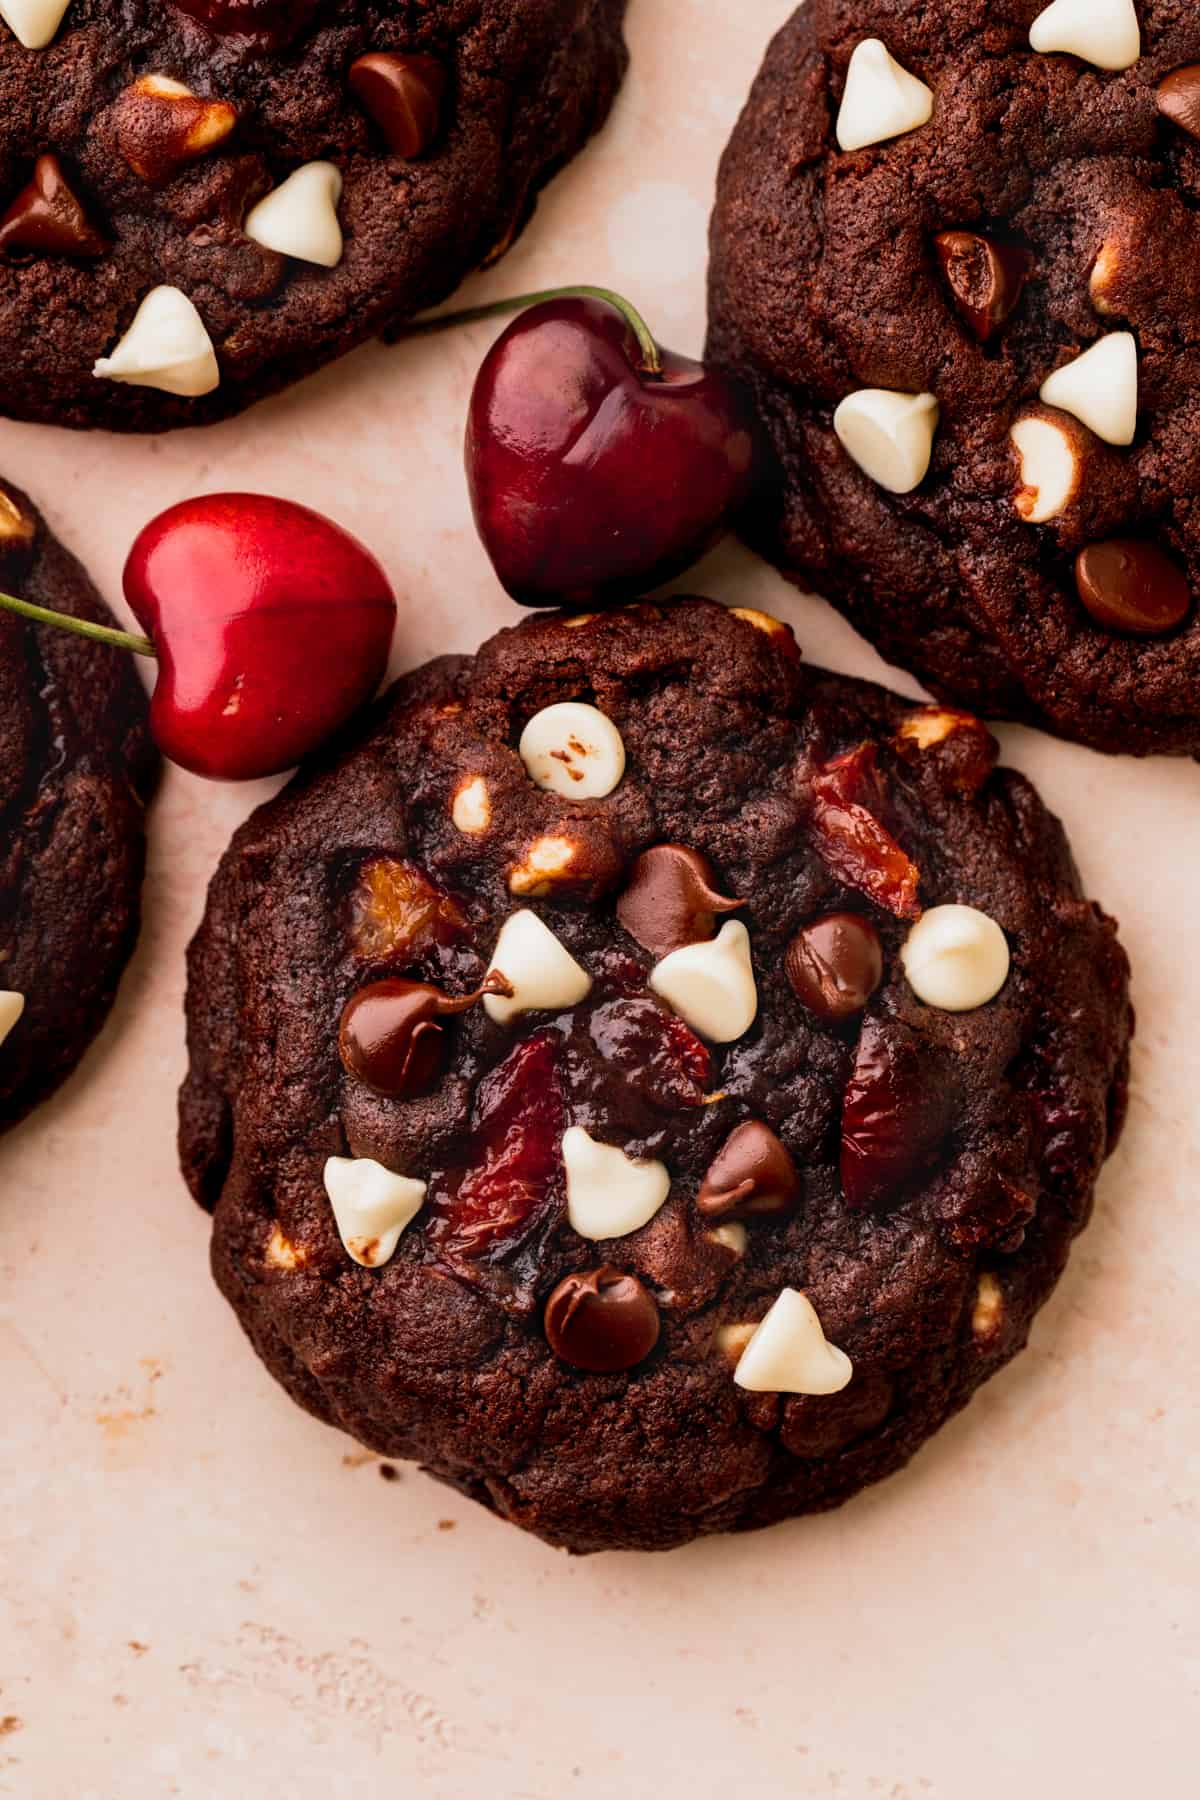 One cookie with baked cherries on top.